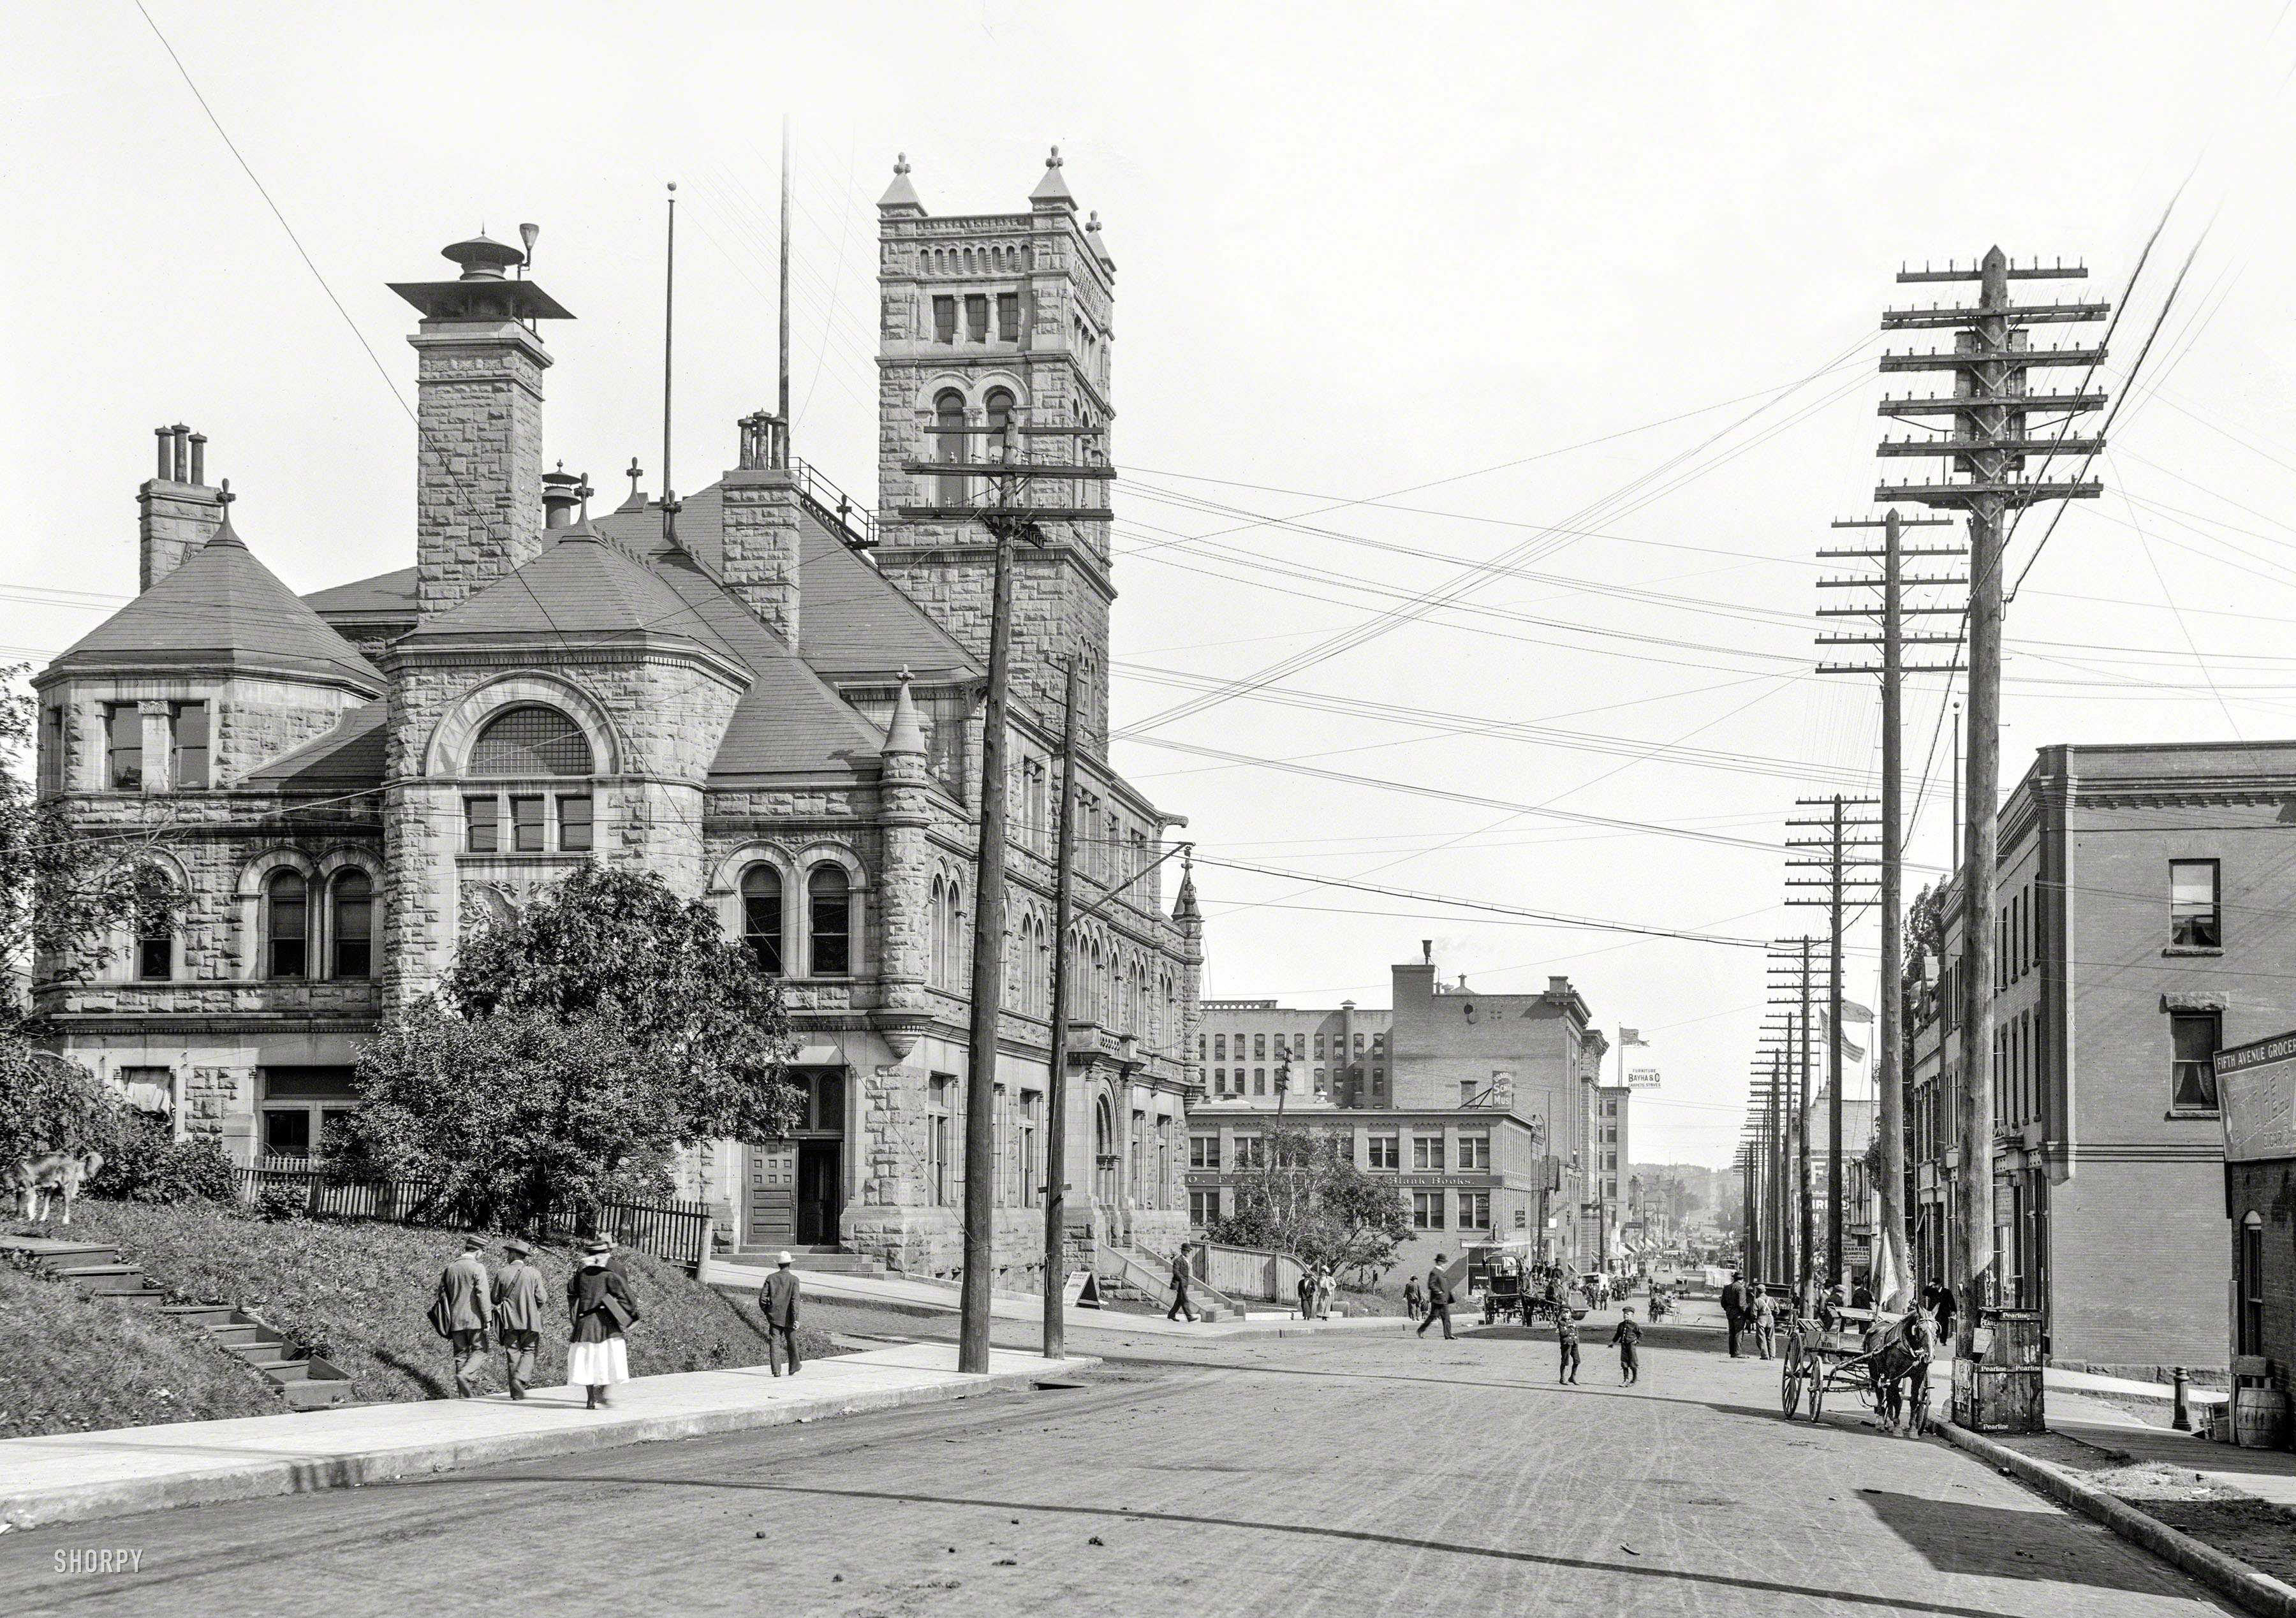 Circa 1910. "Post office and First Street, Duluth, Minnesota." Continuing our visit to the Gopher State. 8x10 glass negative, Detroit Publishing Co. View full size.